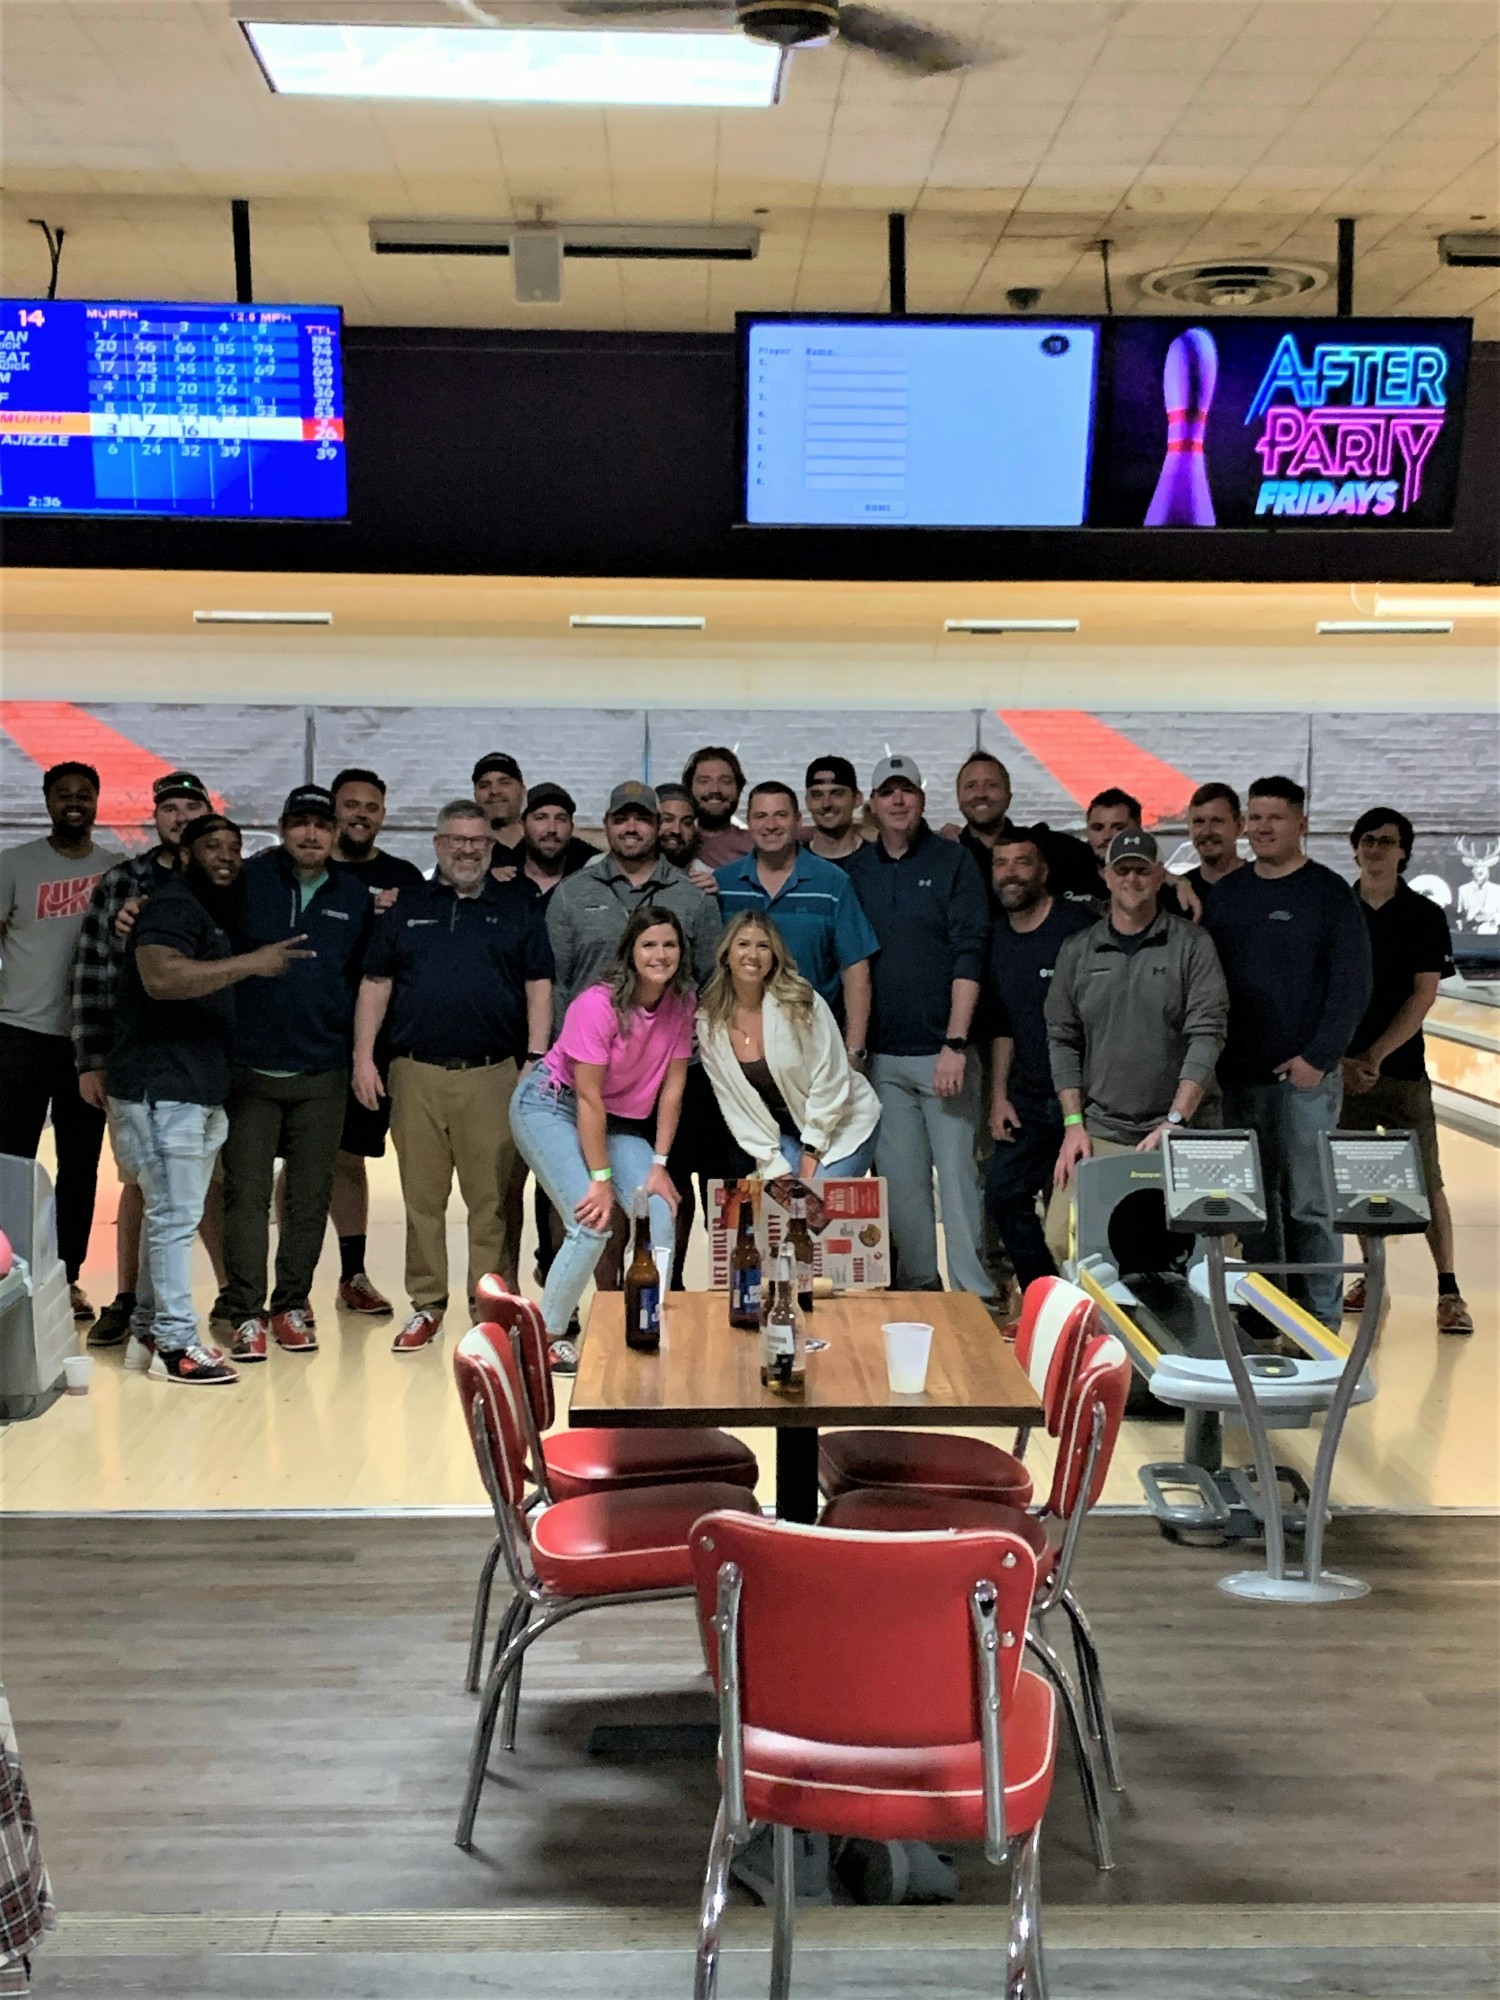 Another fun quarterly event spent bowling with all of the High Mark and Strong Wall employees!